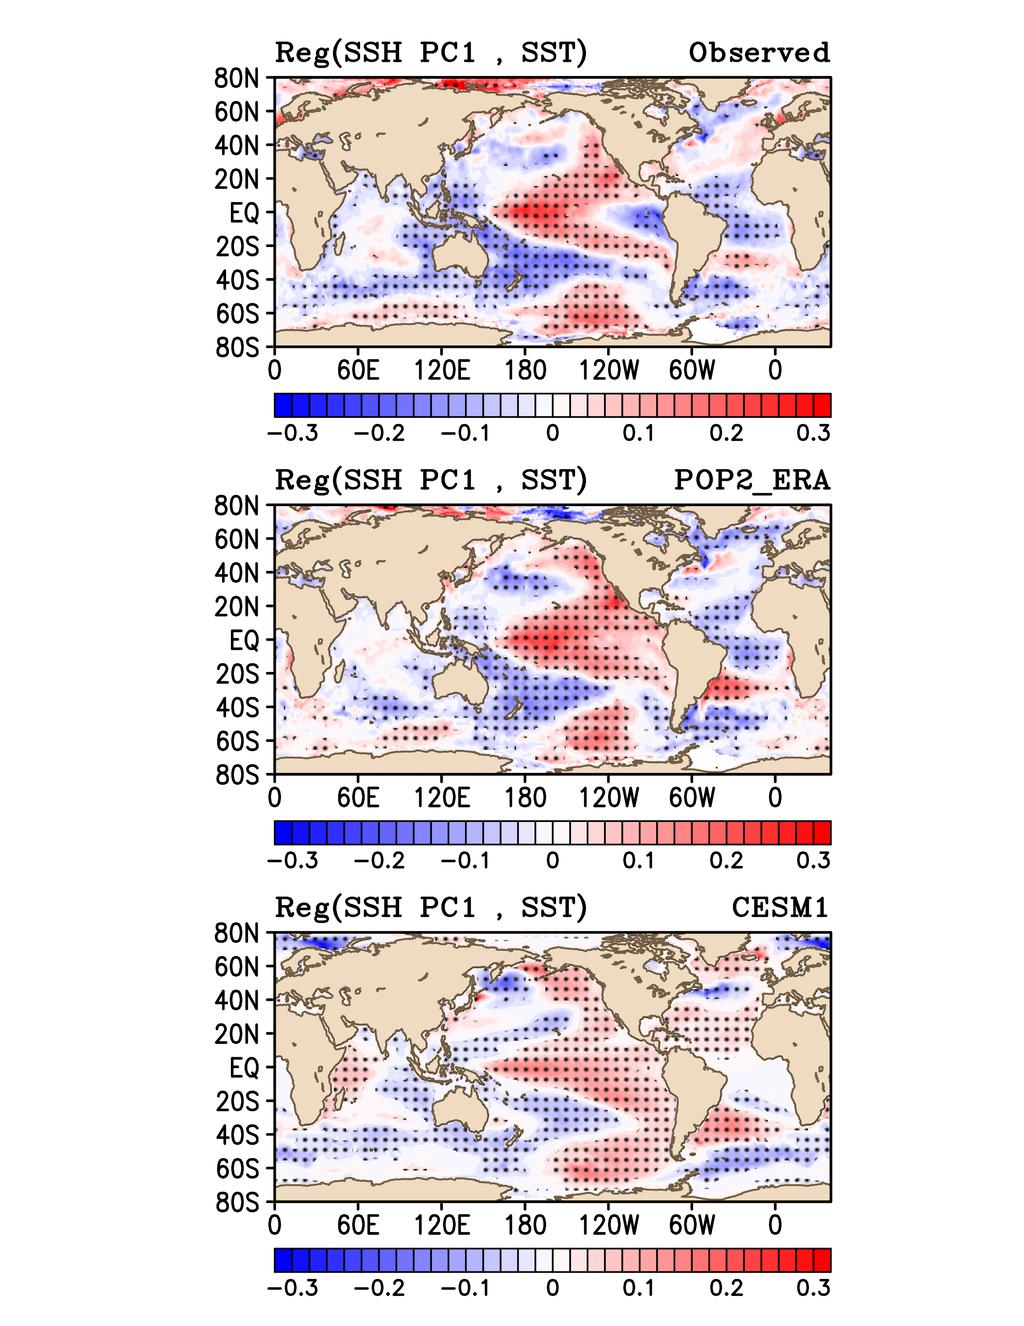 Global SST and leading mode of SSH variability in the South Atlantic Meridional pattern in the South Atlantic from 60 S to the equator, similar to the spatial pattern of the leading SSH PC.